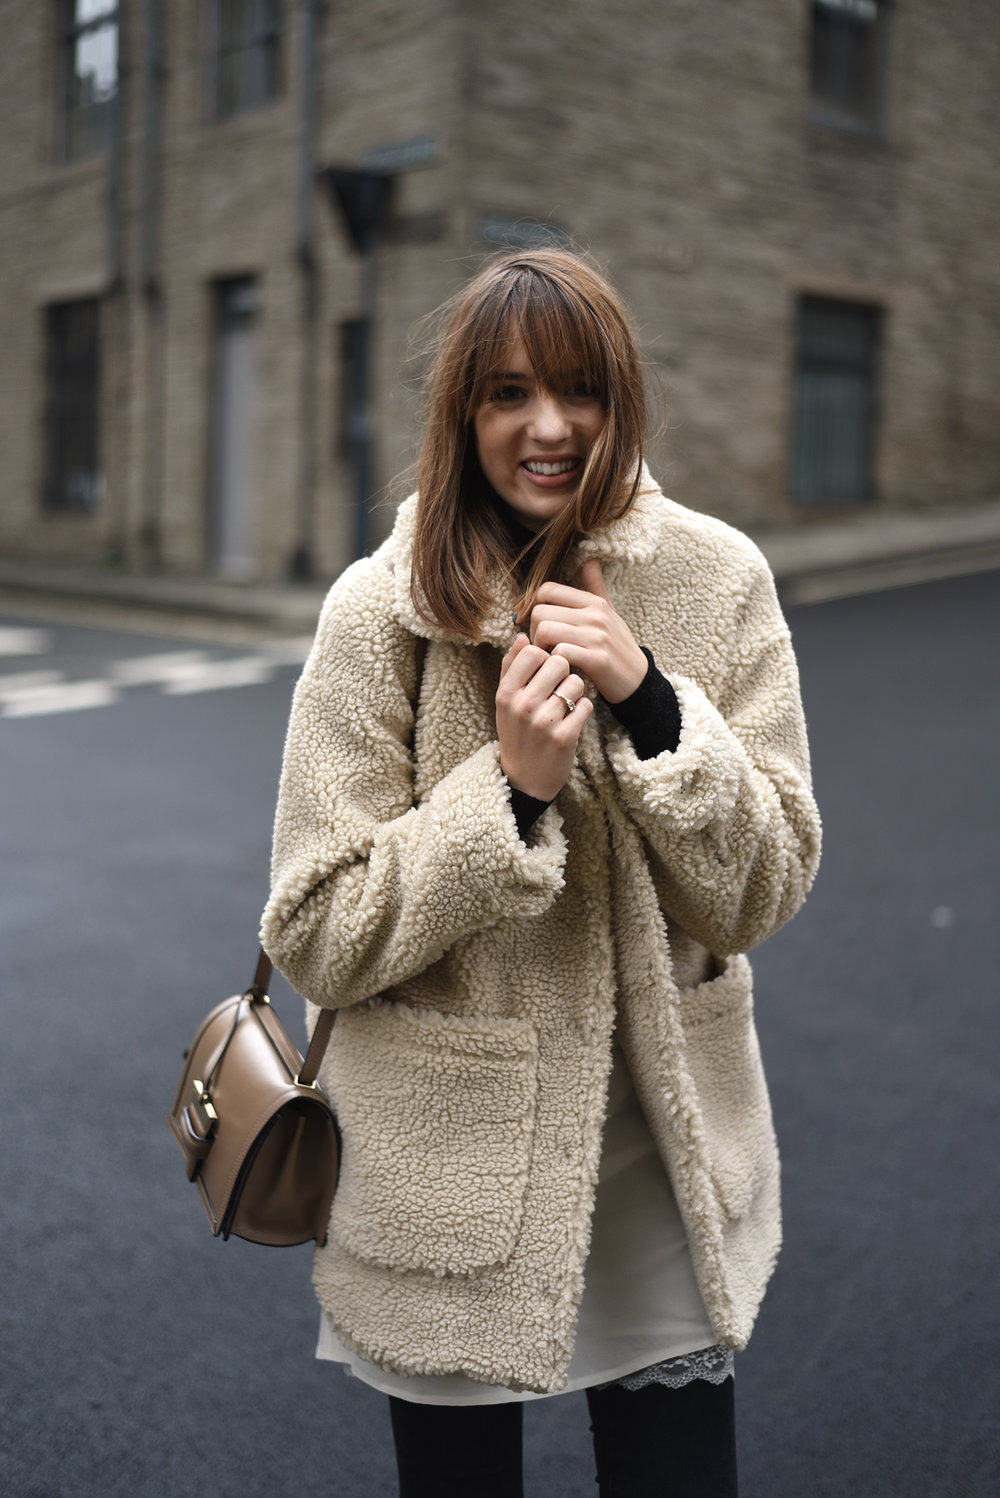 The Teddy Coat — SHOT FROM THE STREET